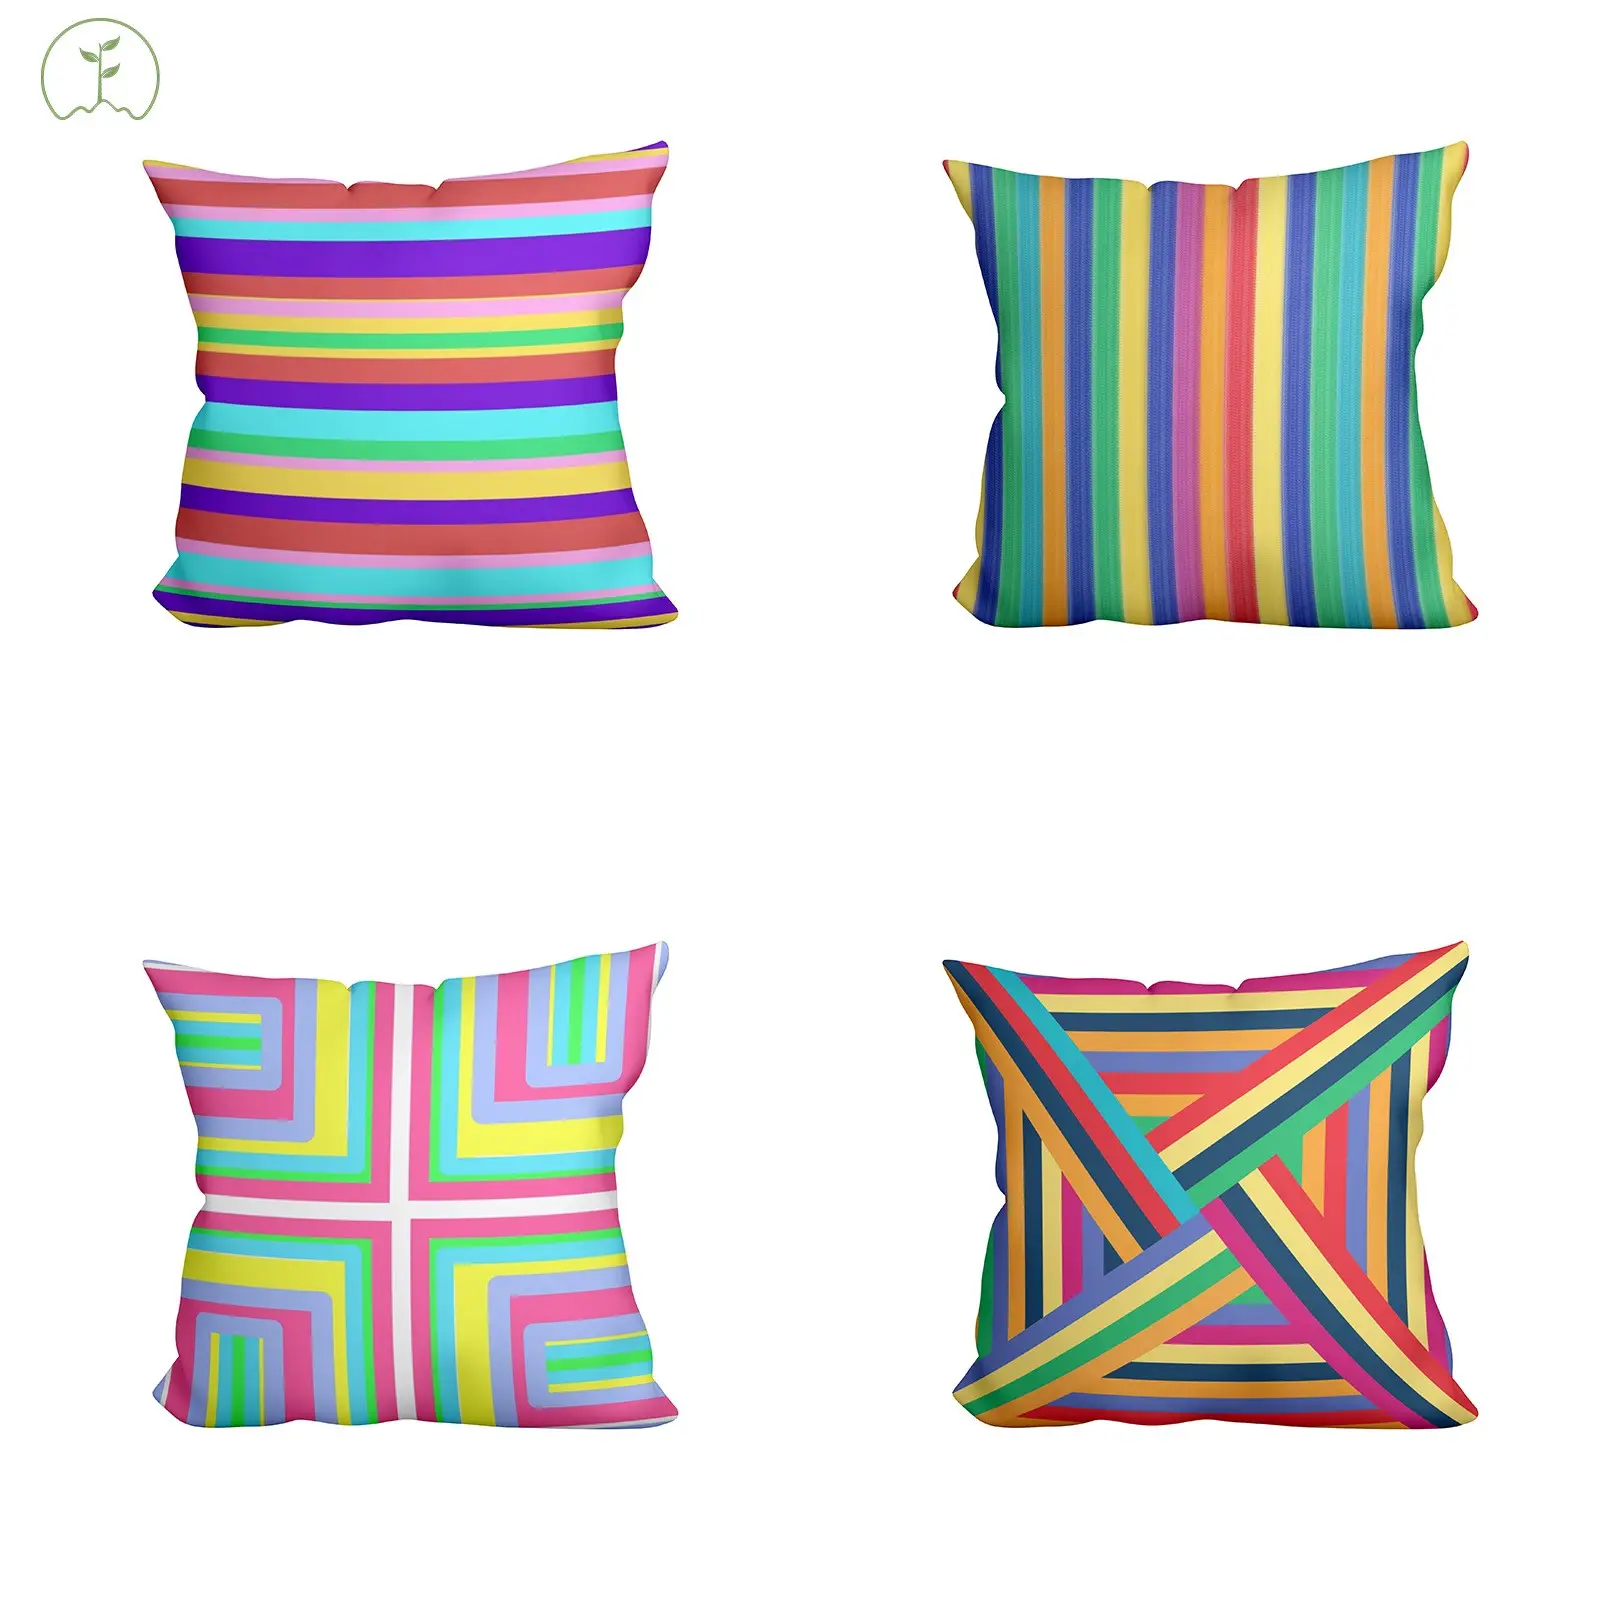 Custom Print Decorative Pillow Cover Printed pillowcase seat cushions For Bedroom Living Room Sofa Cushion Pillow Case